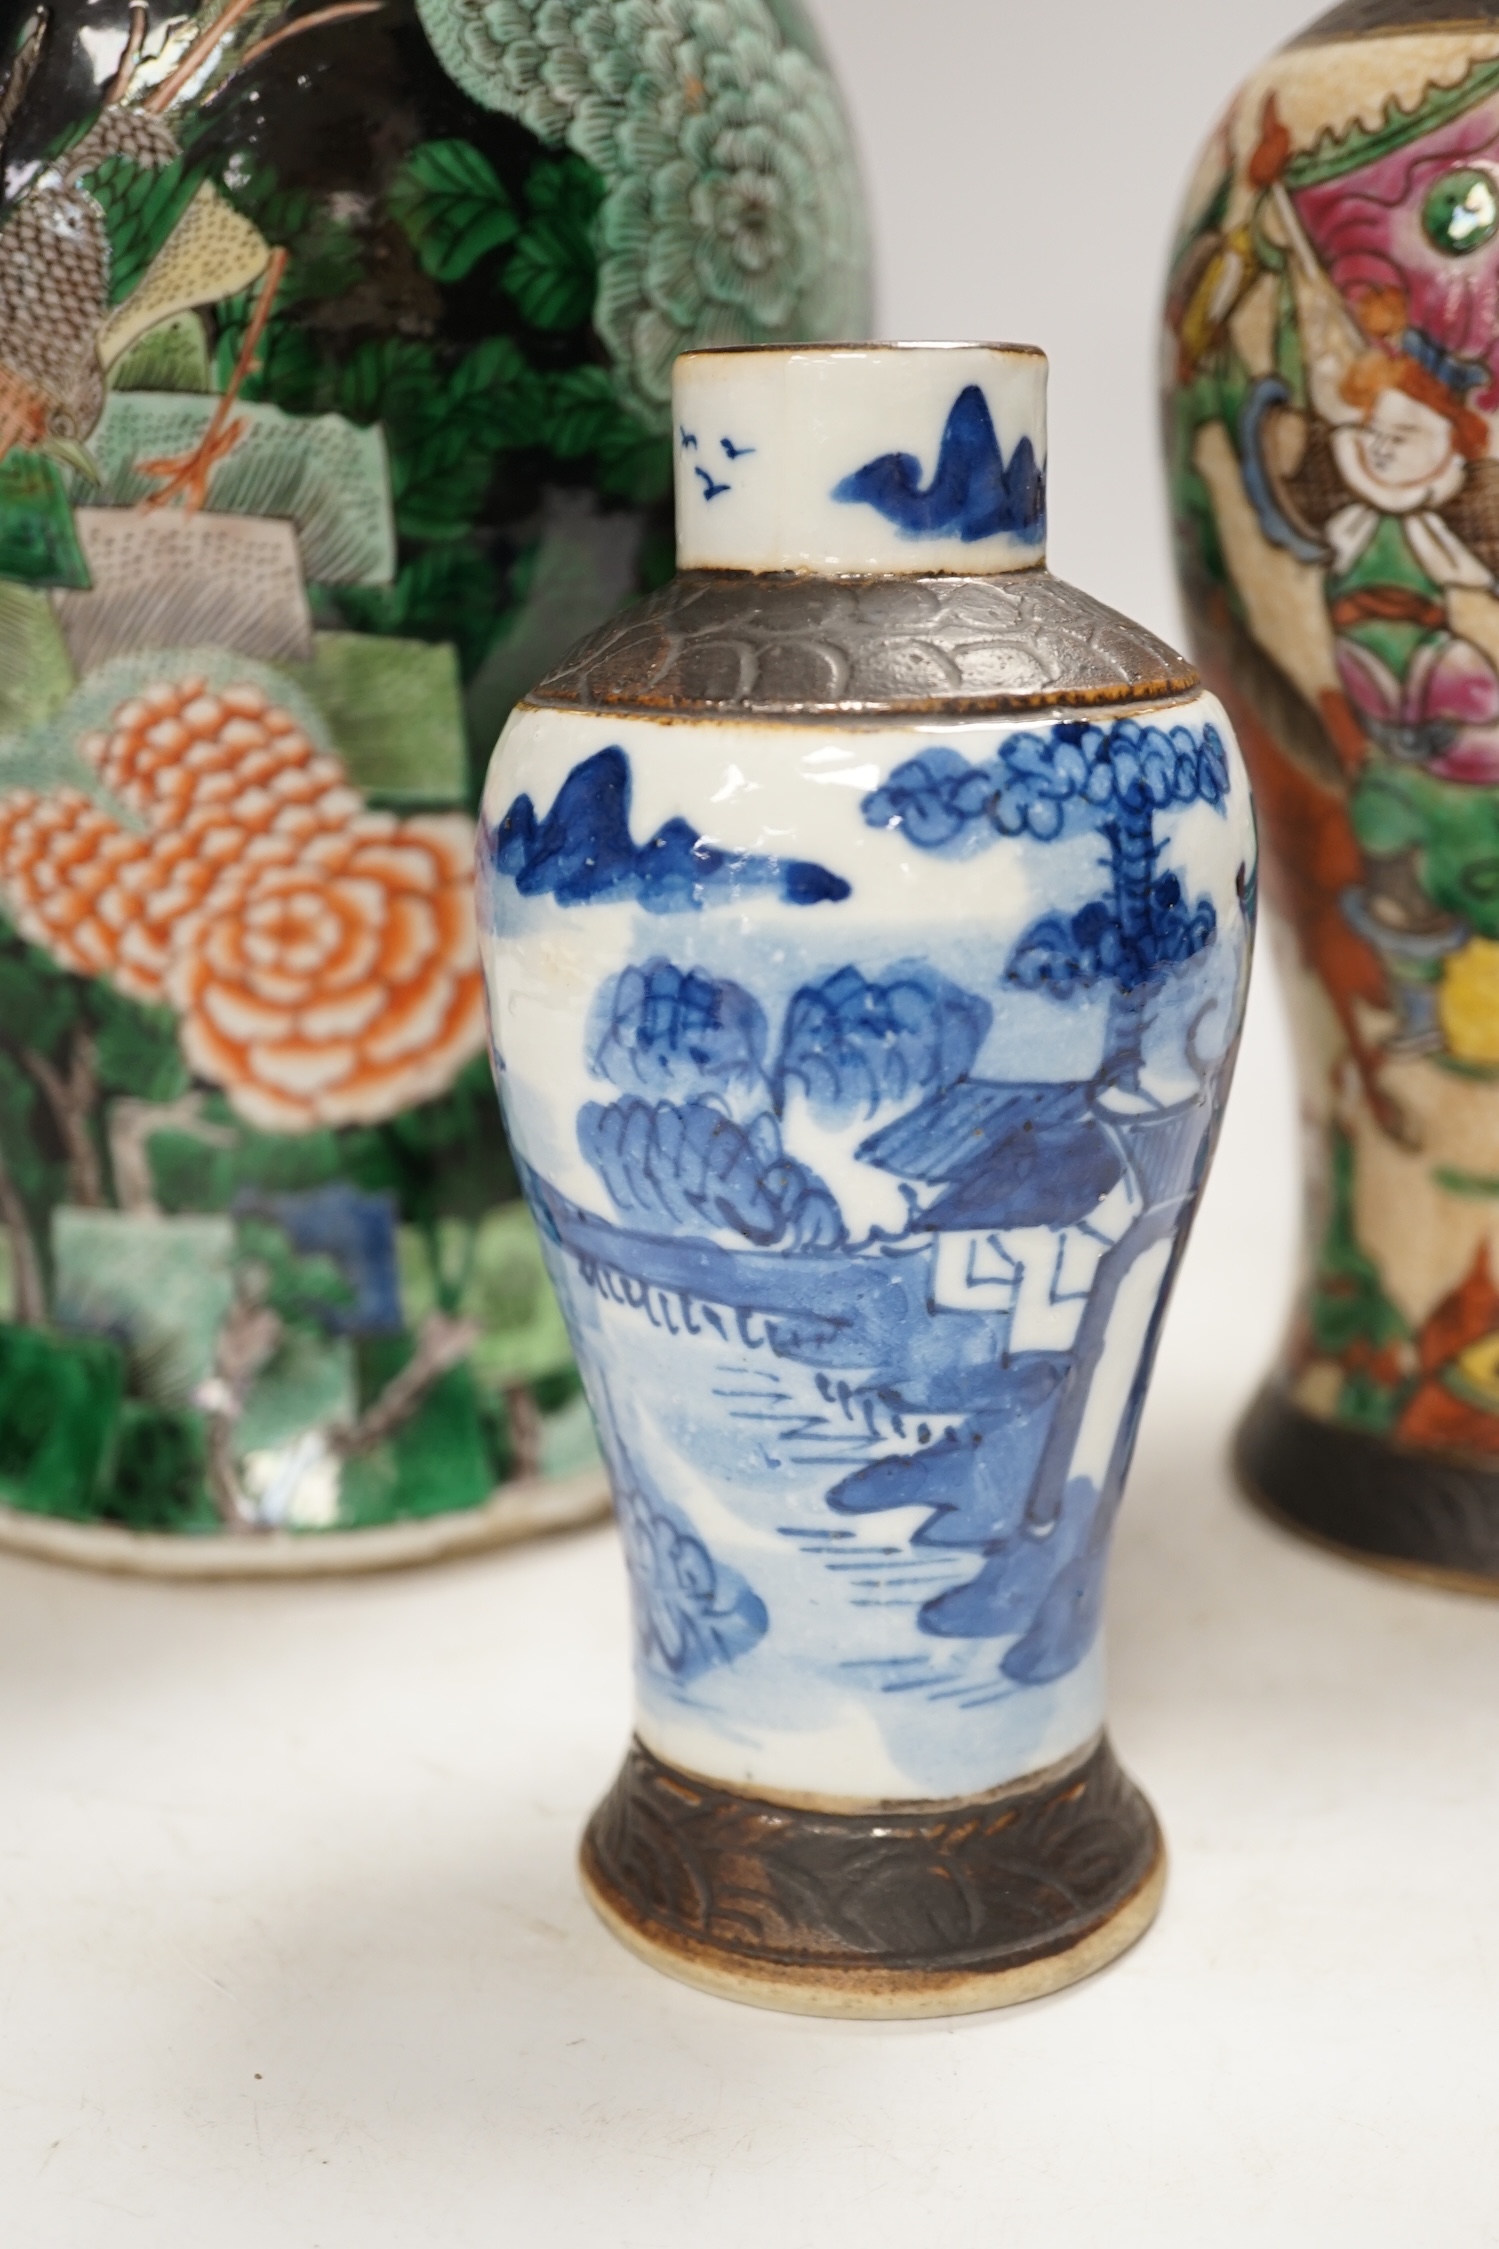 Three Chinese vases, 19th/early 20th century, including a cut down famille noire vase, crackleglaze and blue and white vases, tallest 34cm. Condition - fair to poor